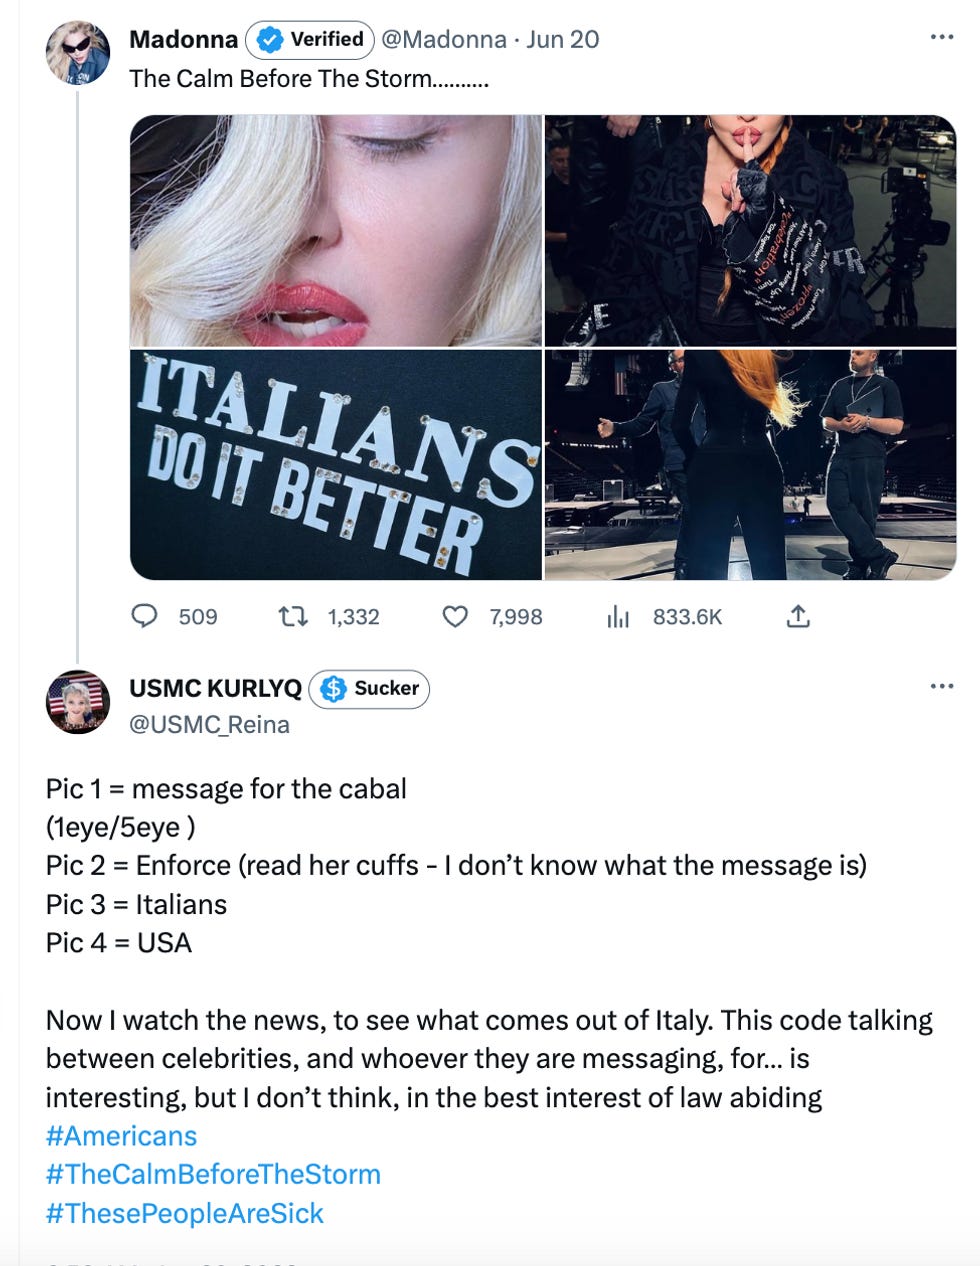  Pic 1 = message for the cabal (1eye/5eye )  Pic 2 = Enforce (read her cuffs - I don\u2019t know what the message is) Pic 3 = Italians  Pic 4 = USA   Now I watch the news, to see what comes out of Italy. This code talking between celebrities, and whoever they are messaging, for\u2026 is interesting, but I don\u2019t thi